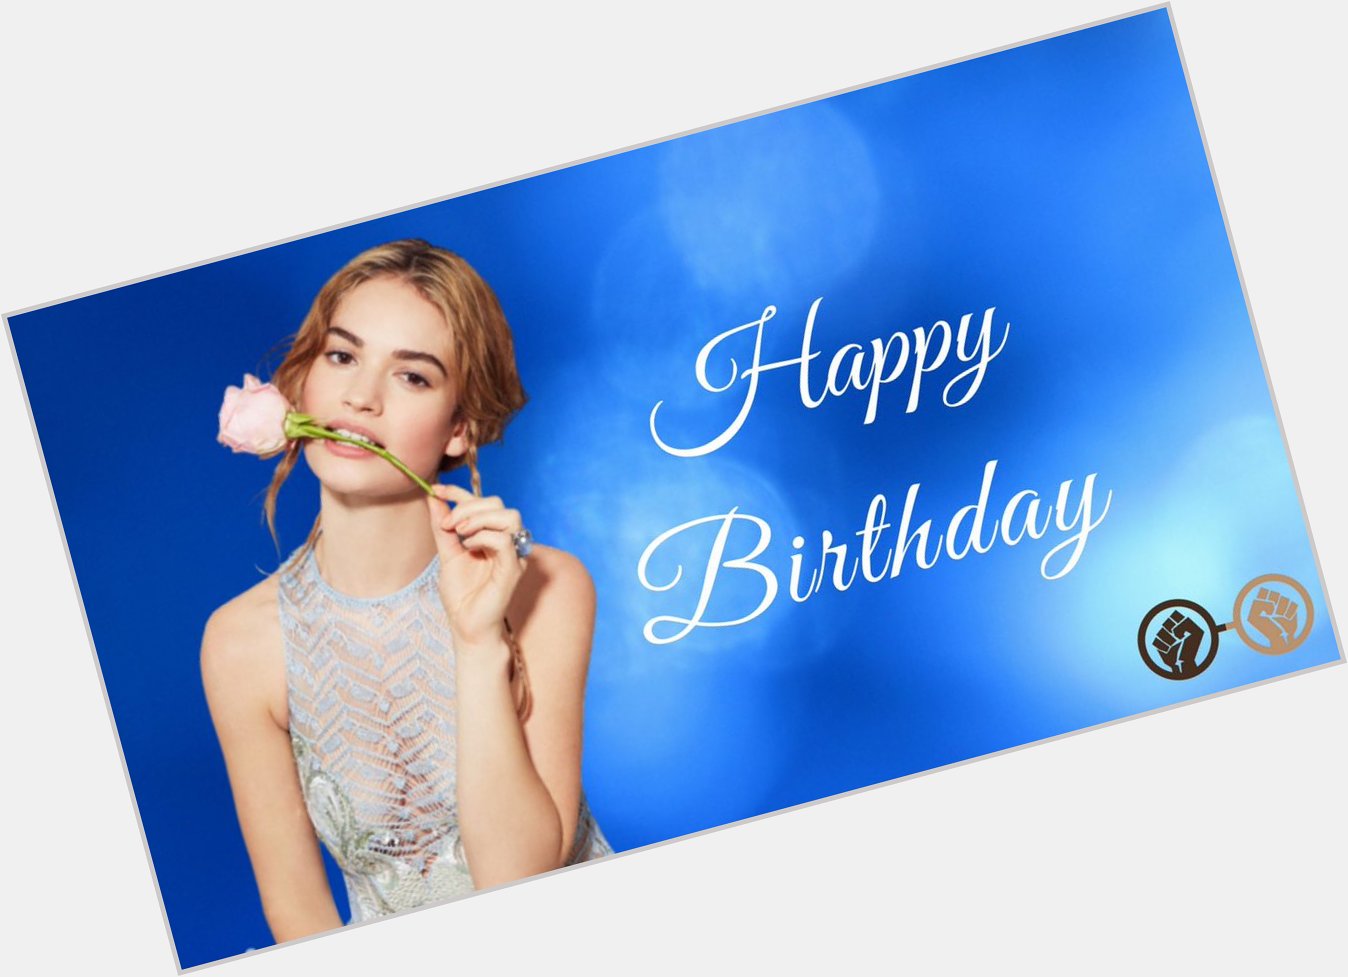 Happy Birthday to Cinderella herself, Lily James! The beautiful & talented actress turns 29 today! 